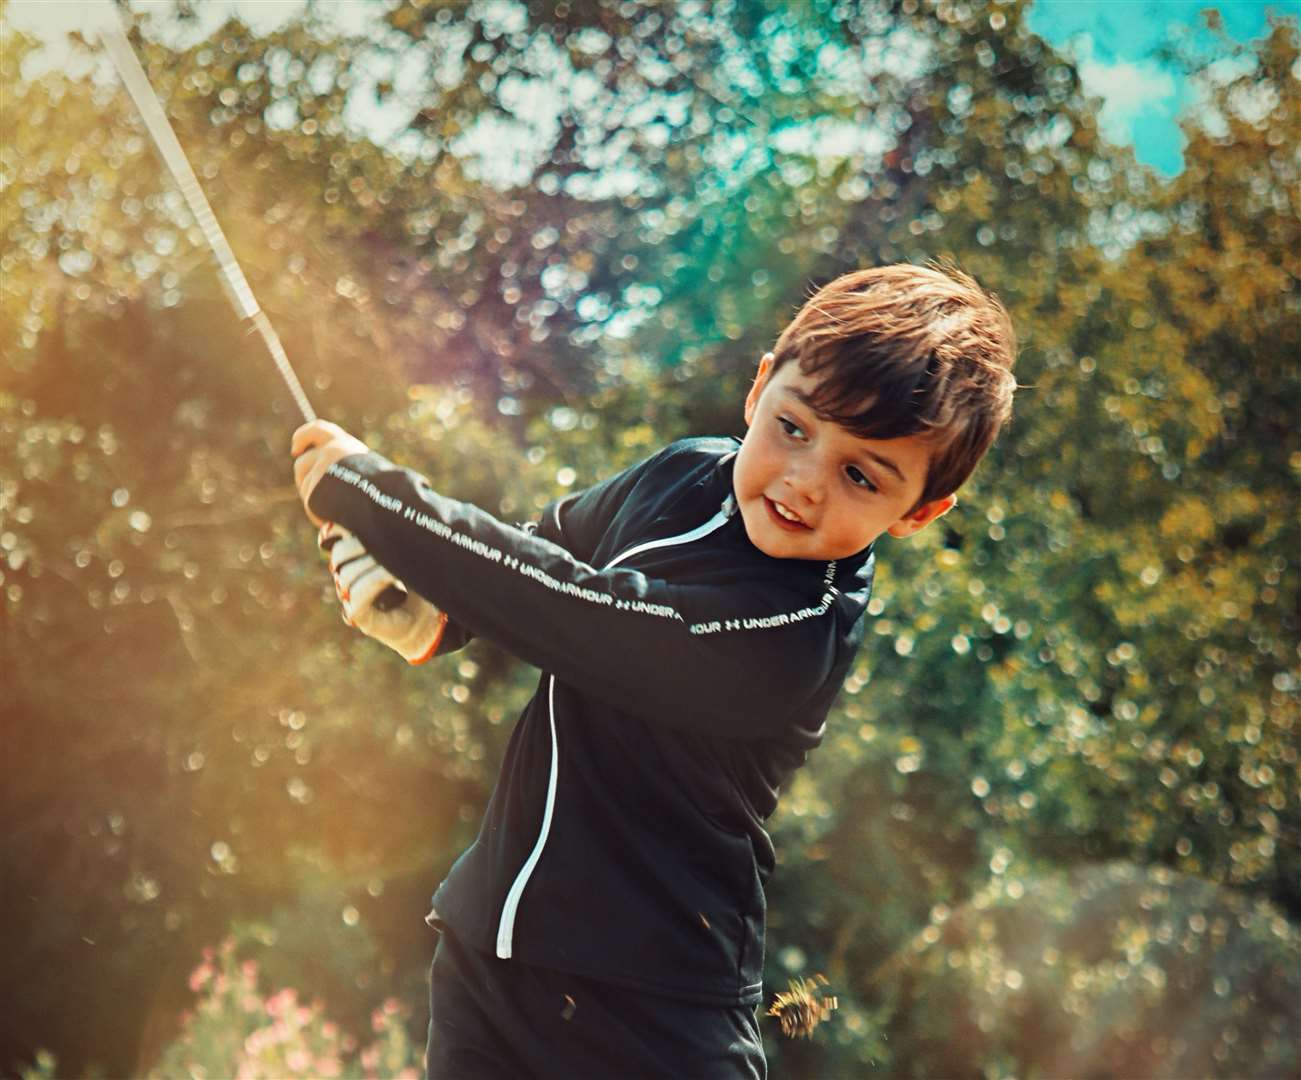 Four-year-old Shane is also a left-handed golfer - something quite rare in the sport